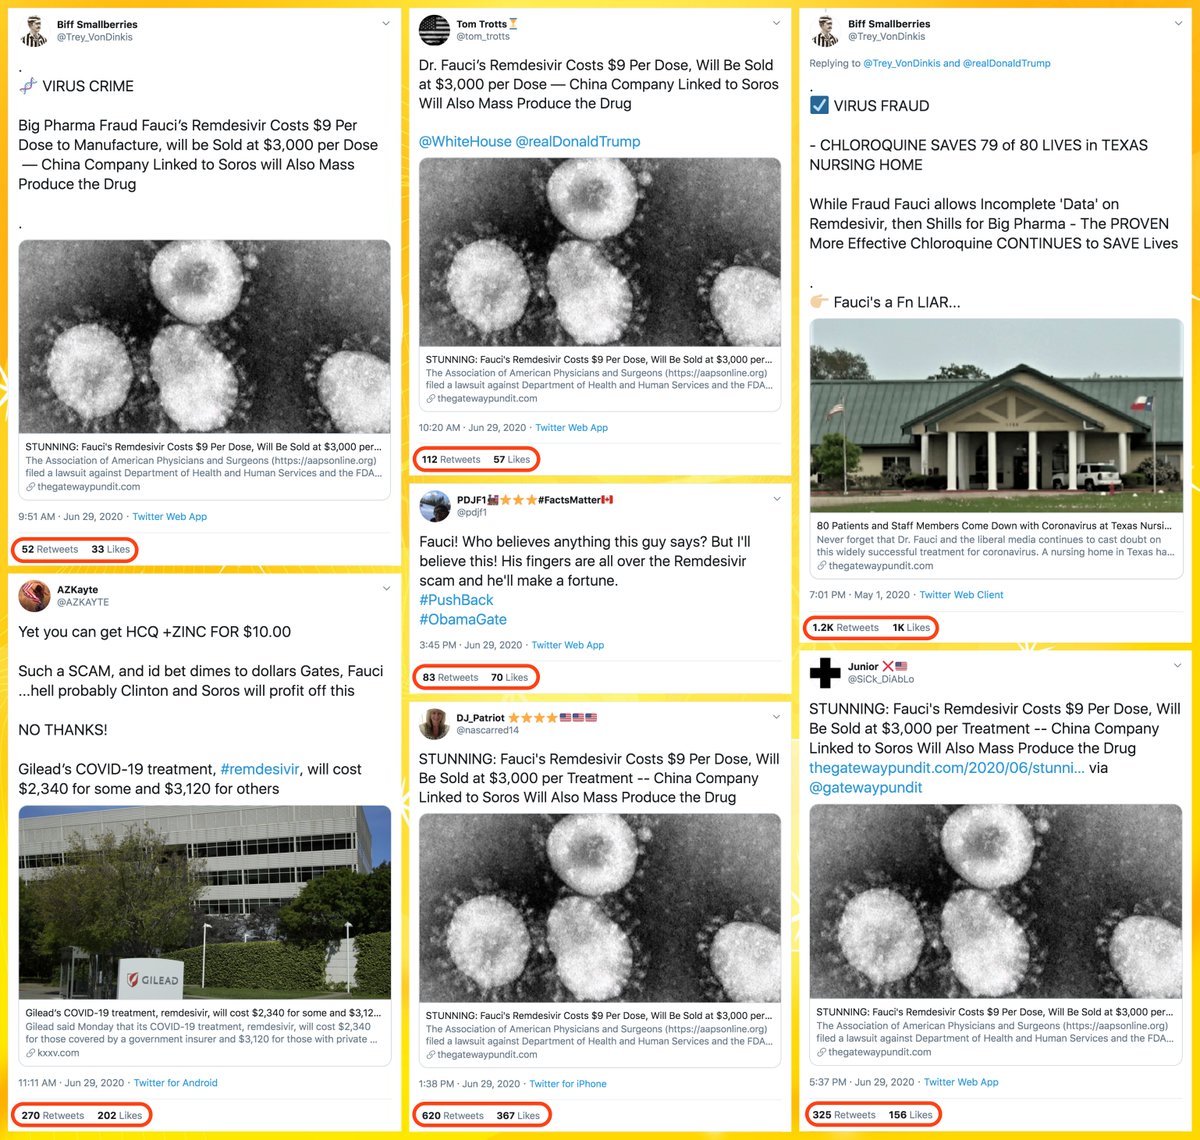 It's a Tuesday, and a bunch of tweets pushing a poorly-explained  @gatewaypundit conspiracy theory about Anthony Fauci, the price of remdesivir, and George Soros have received far more retweets than likes, a fingerprint of the  #Mighty200+  #MAGA retweet rooms.cc:  @ZellaQuixote